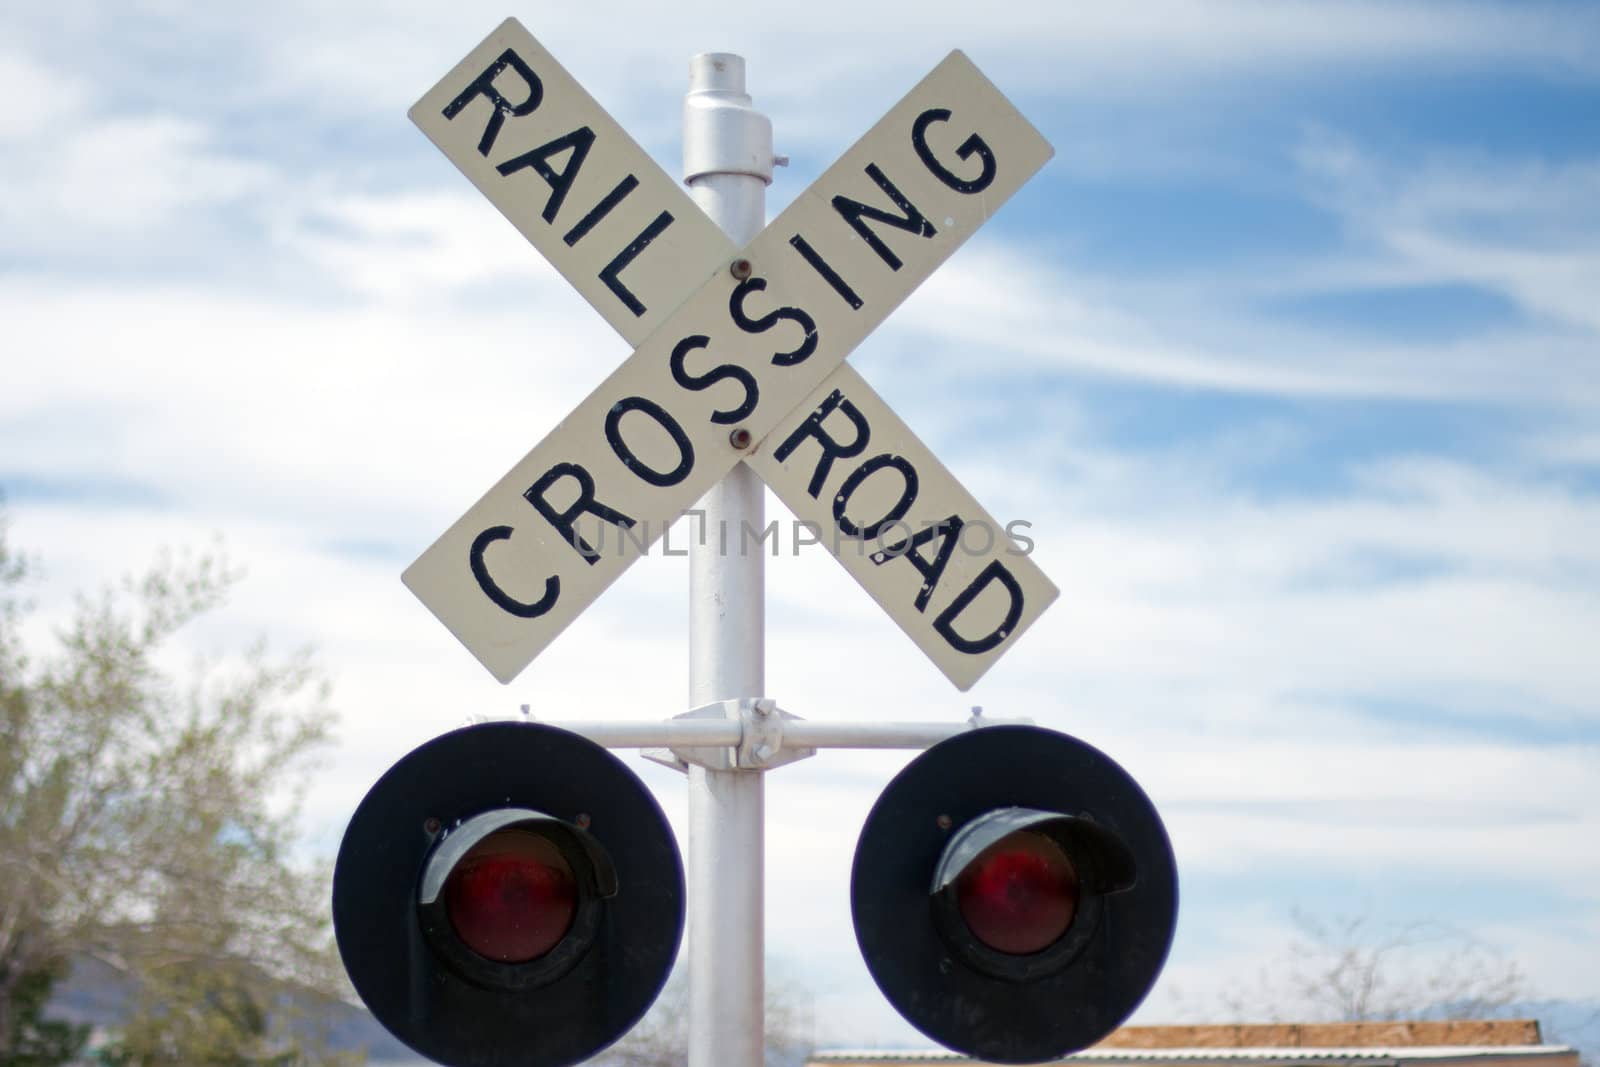 Vintage Rail Road Crossing Sign with red lights